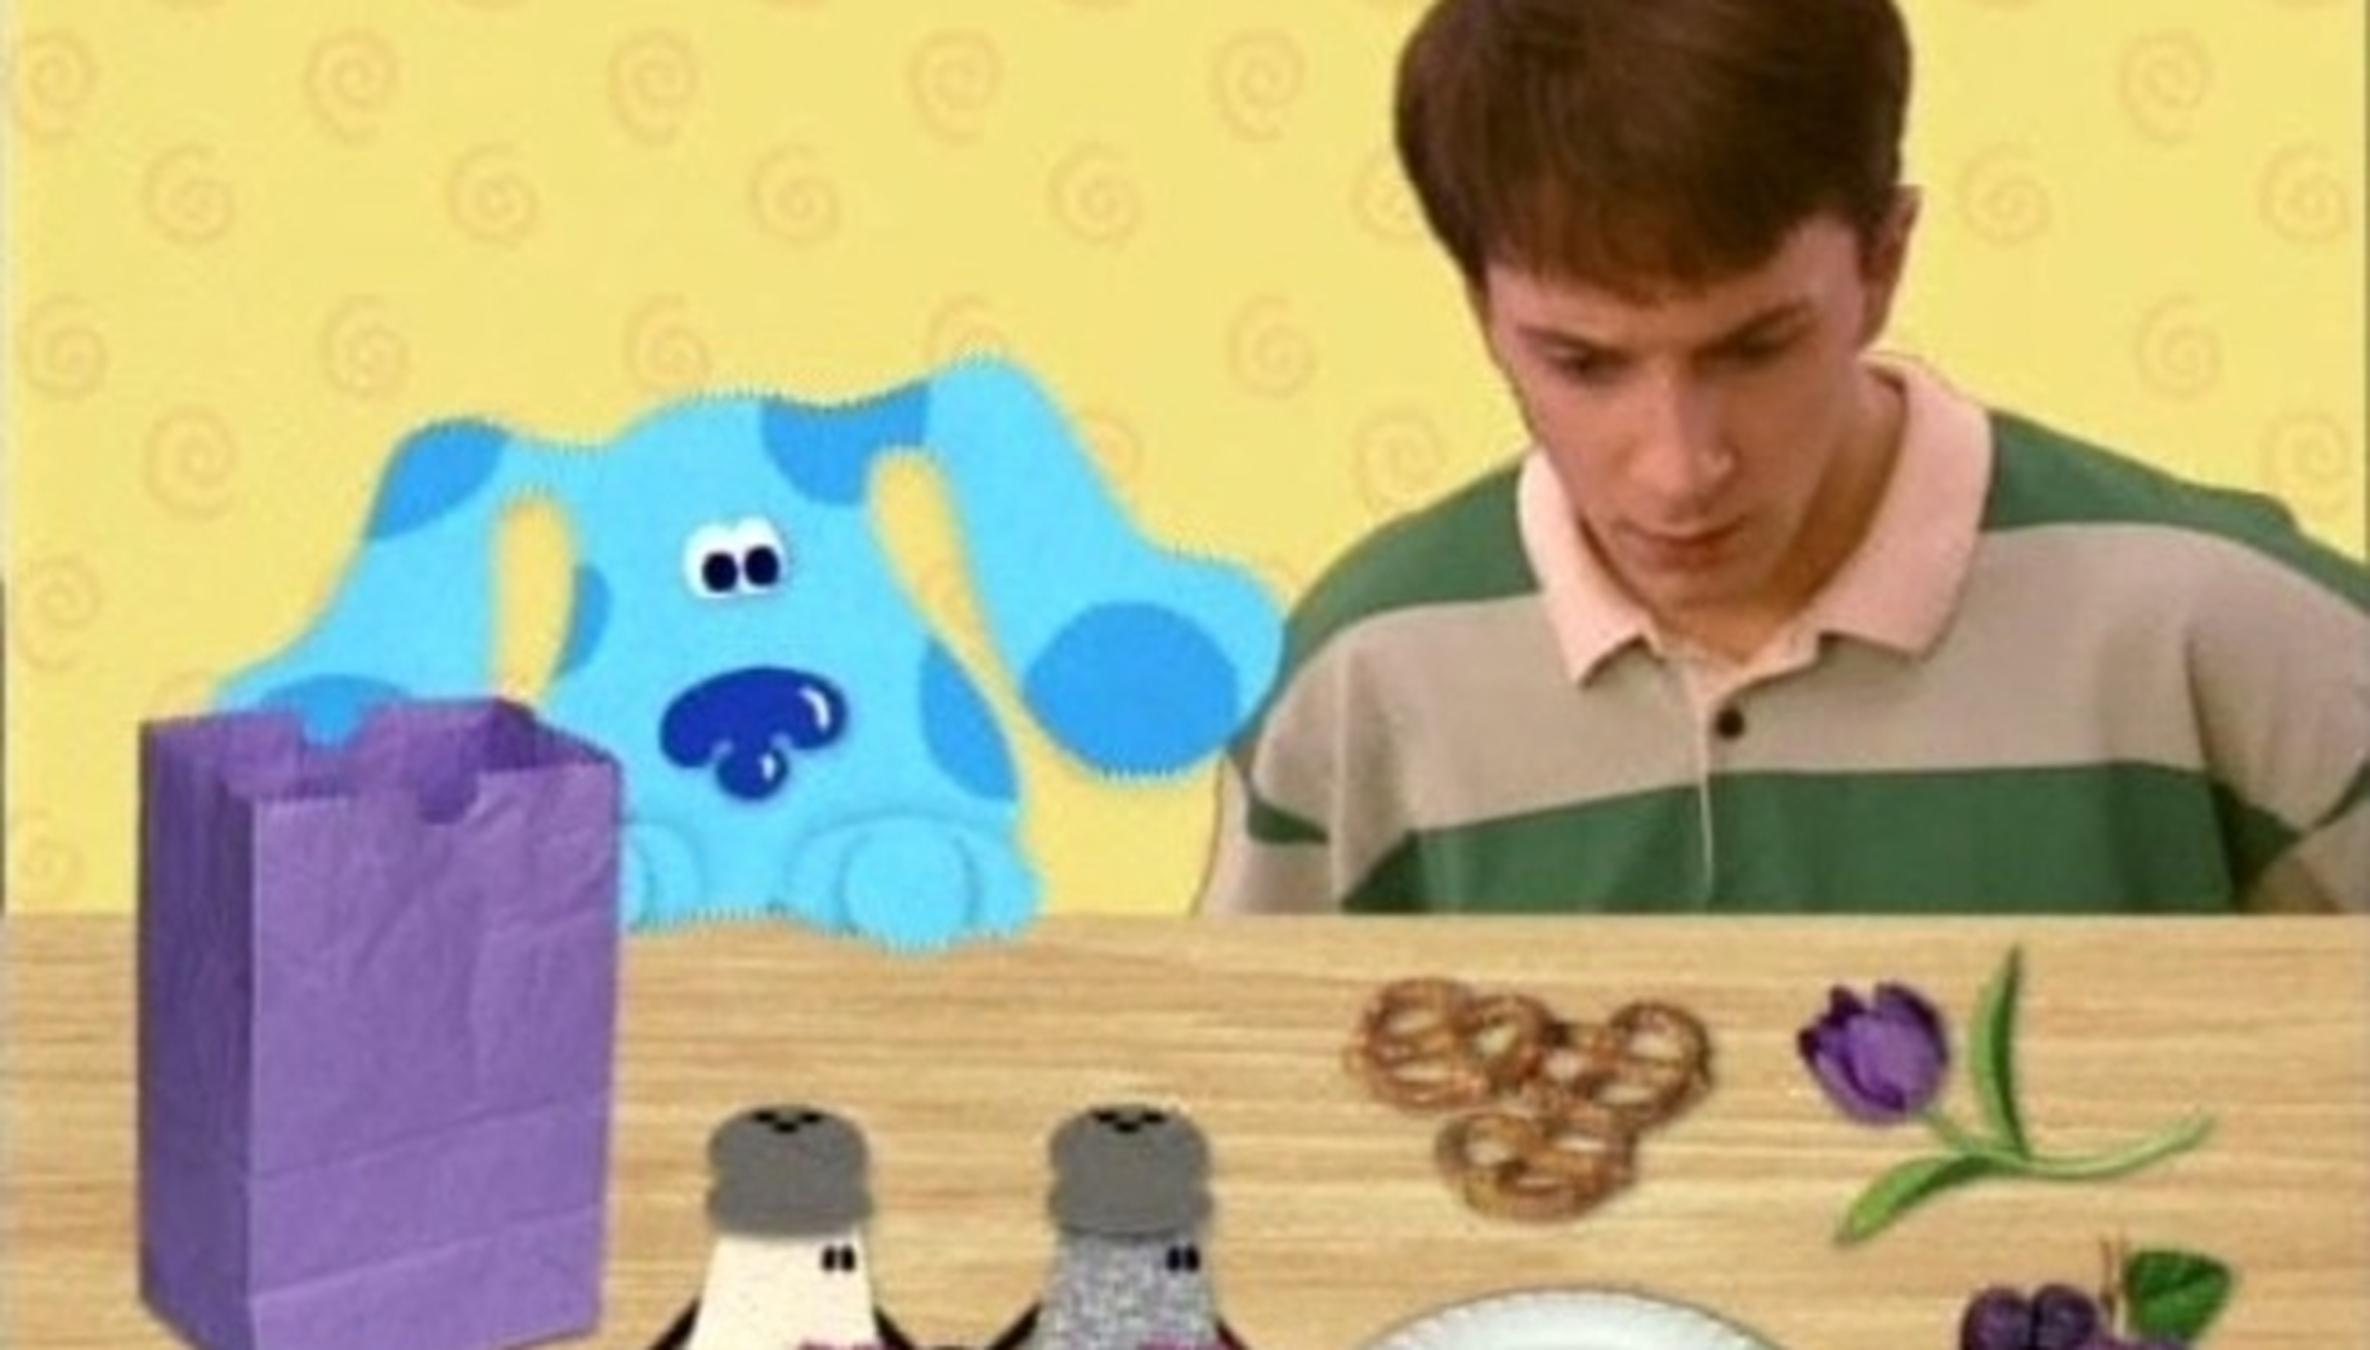 Audition to Be the Host of the Rebooted ‘Blue’s Clues’